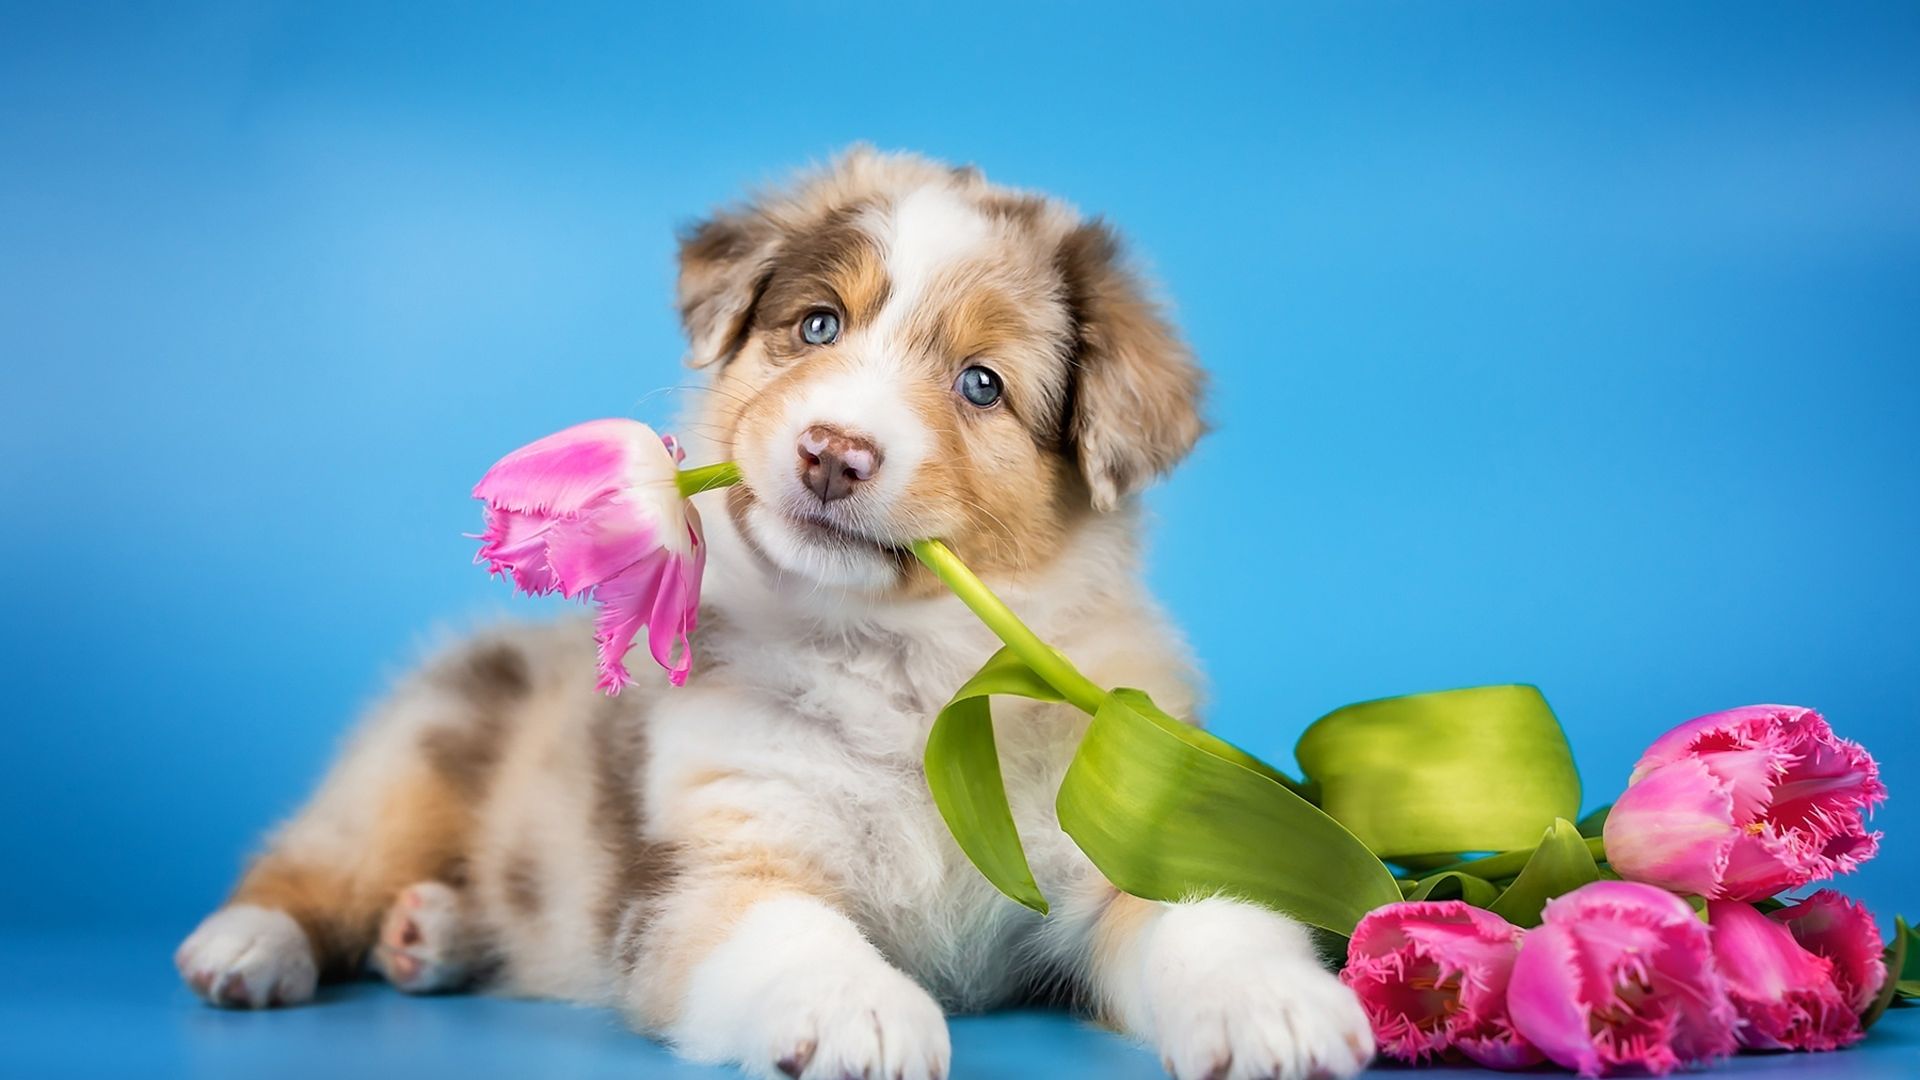 Desktop wallpaper cute dog puppy playing with flowers adorable hd image picture background f